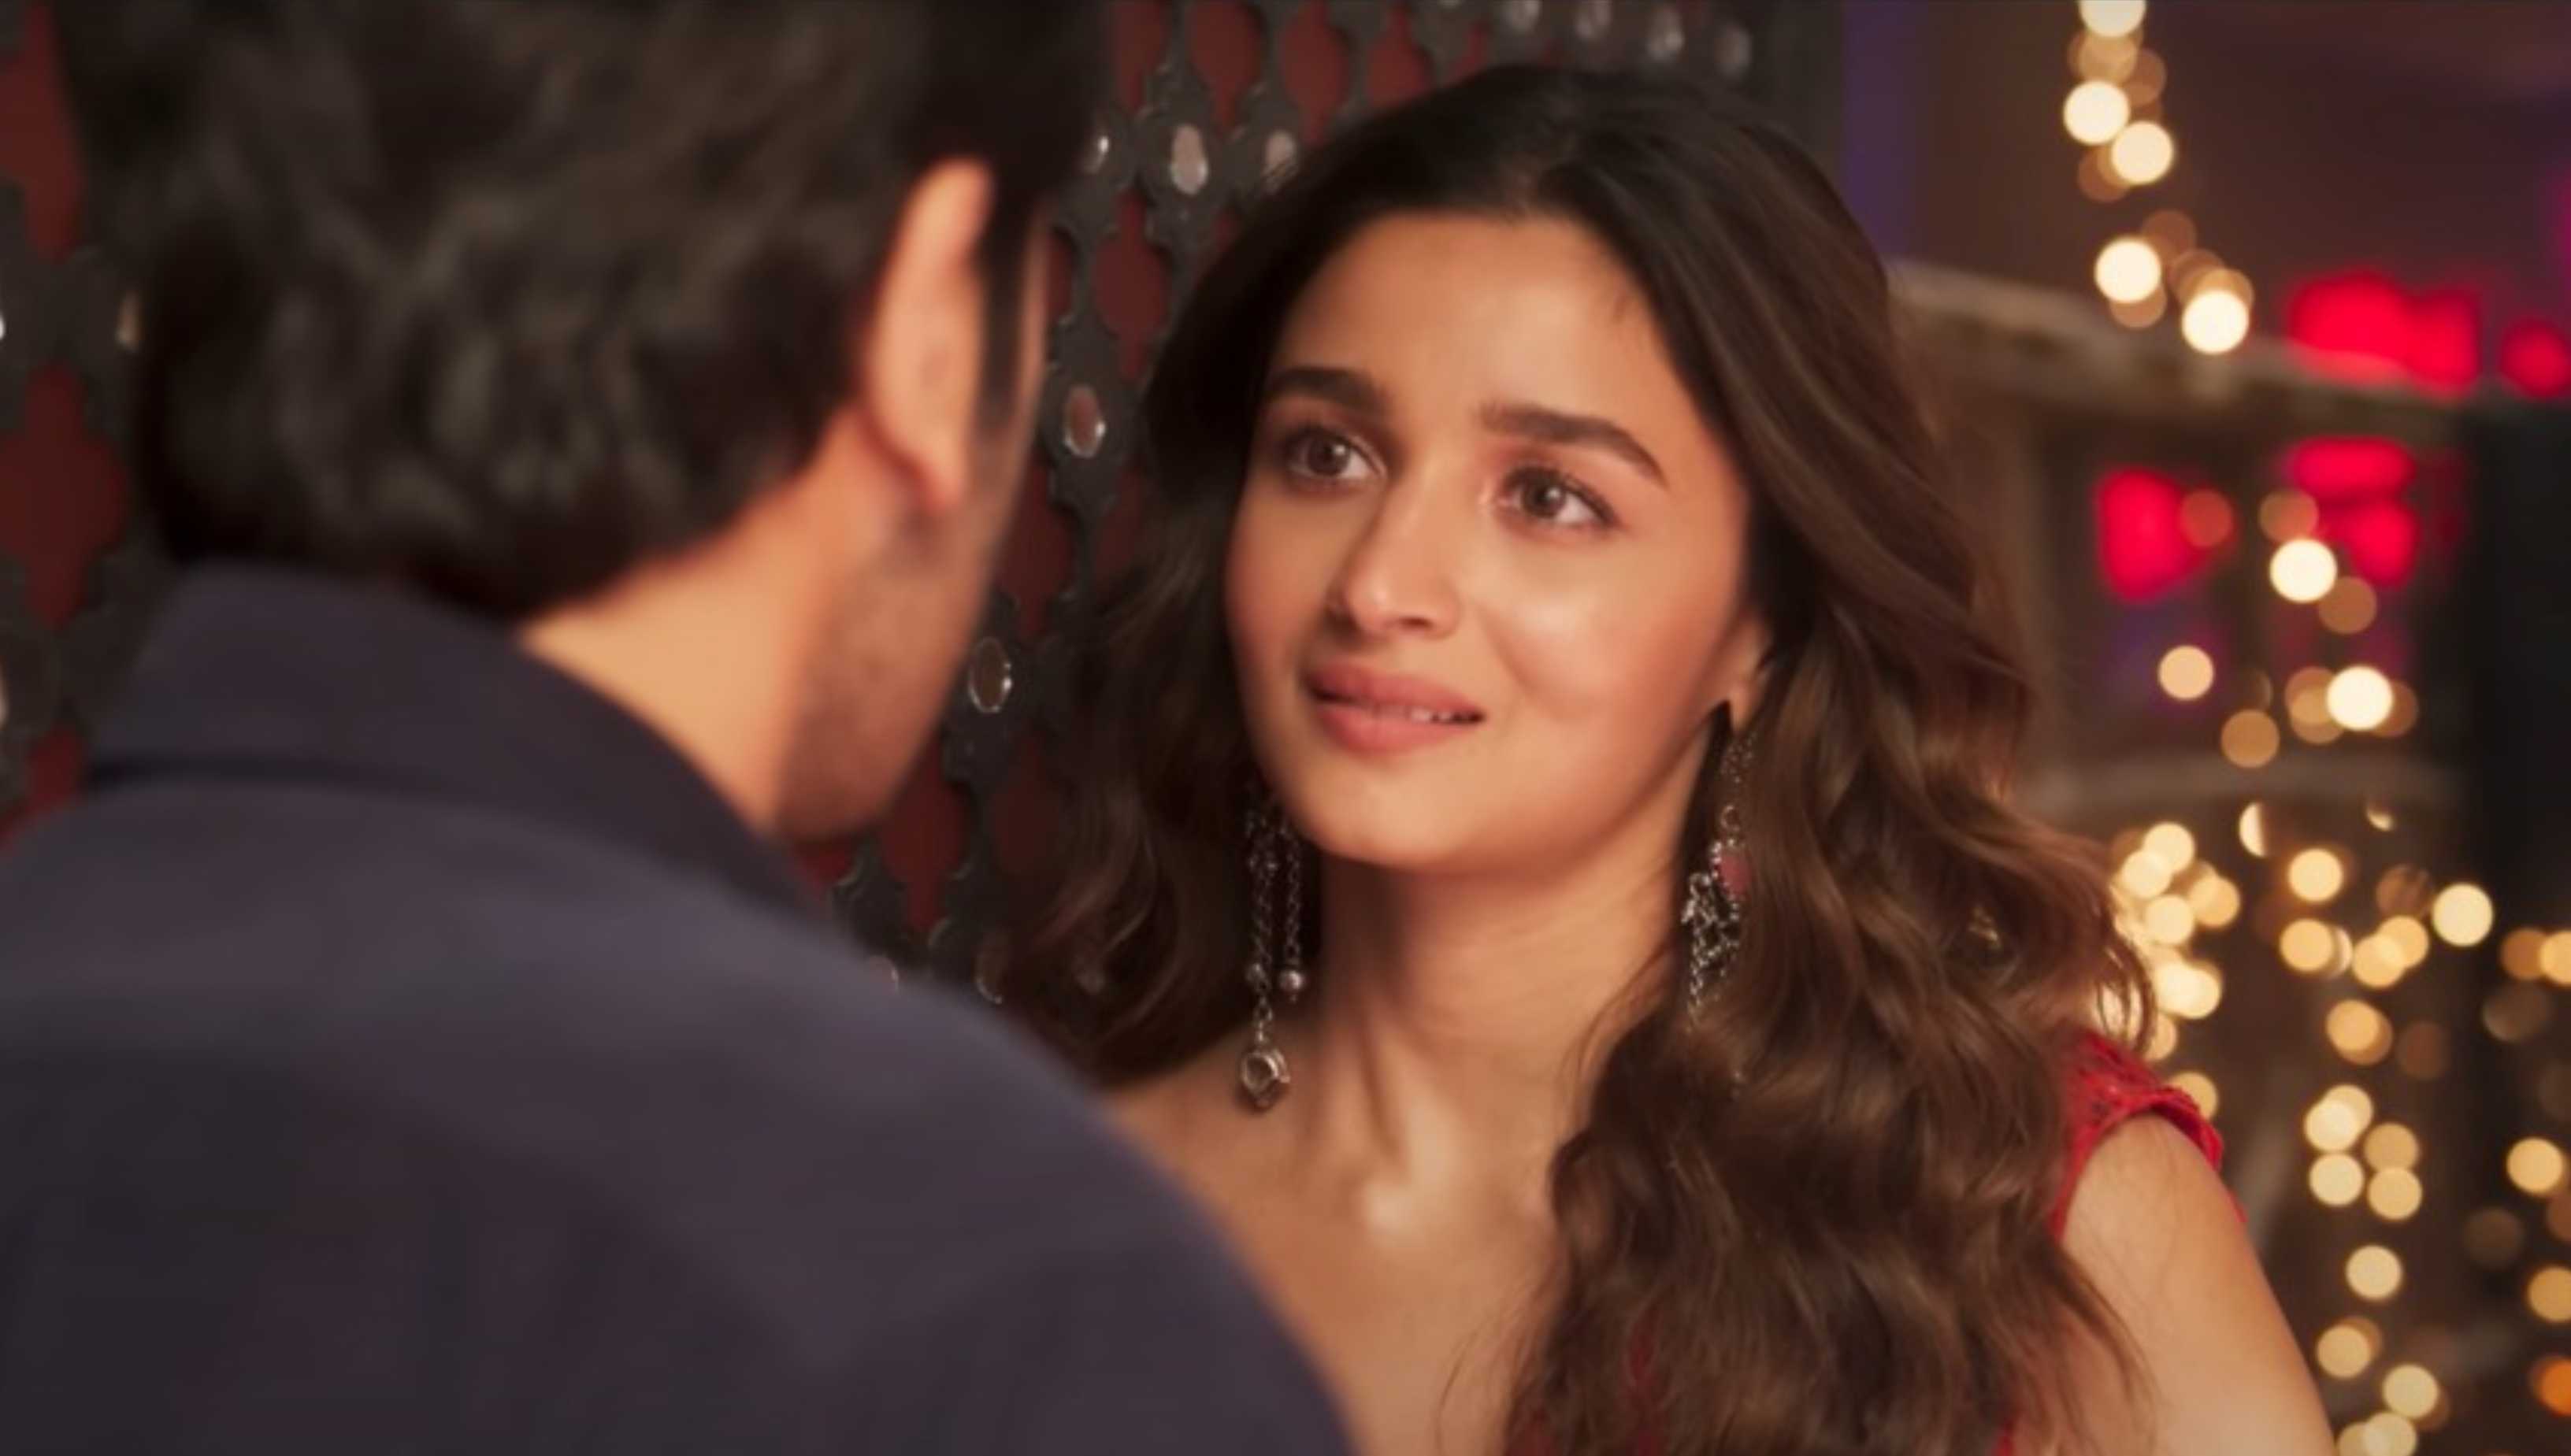 Alia Bhatt on repeating Shiva’s name in Brahmastra: ‘People can literally play a drinking game based on it’